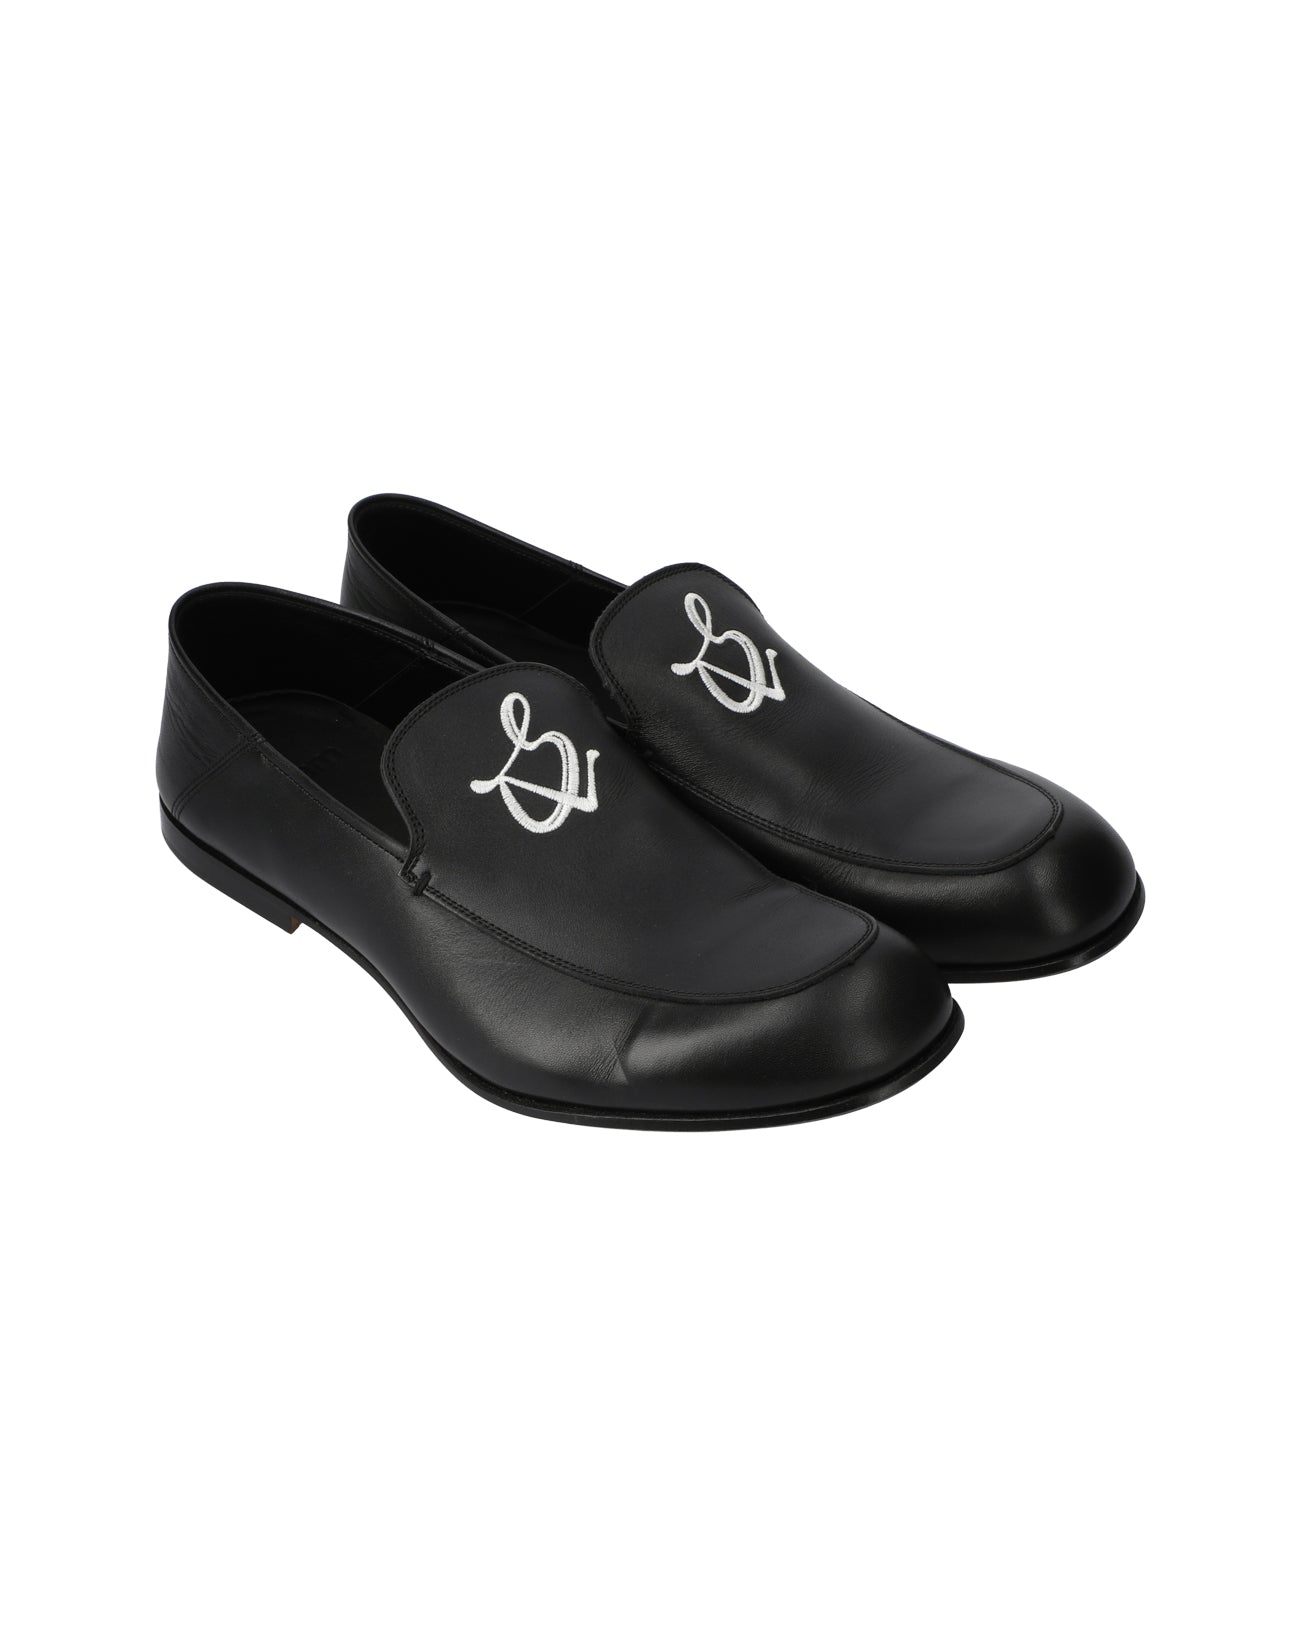 Classic loafers - black - FAB4 ONLINE STORE